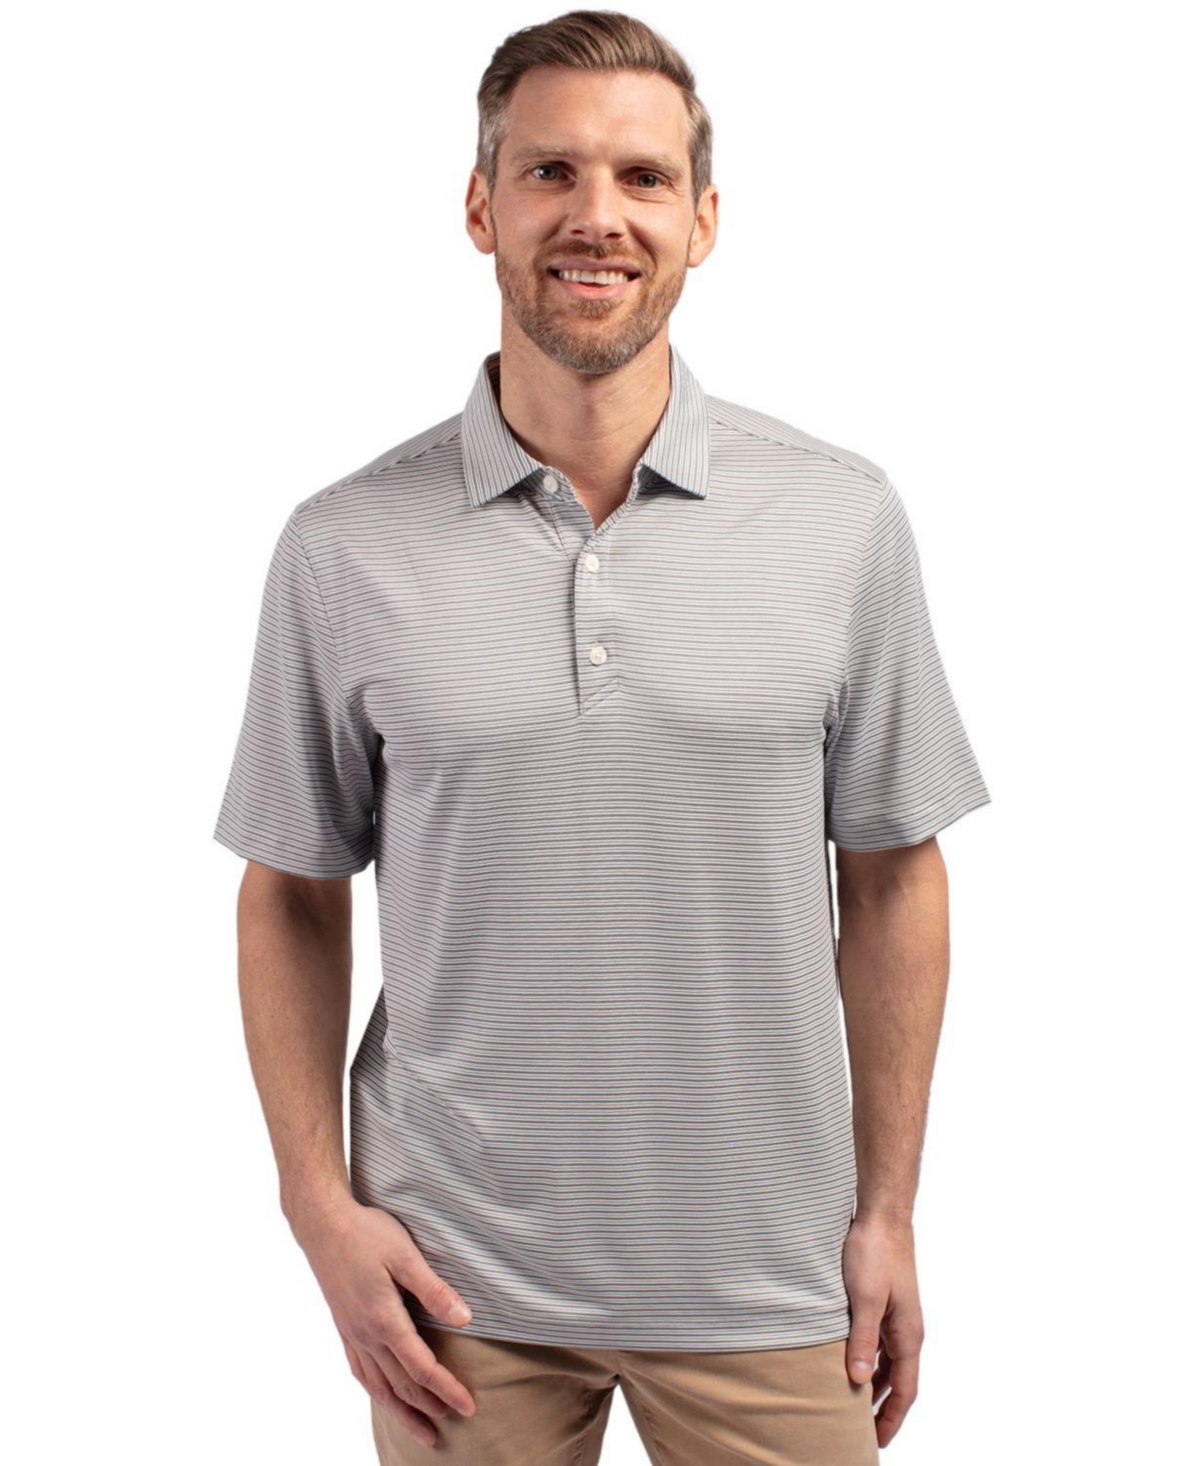 Men's Forge Eco Double Stripe Stretch Recycled Polo Shirt - Polished/white